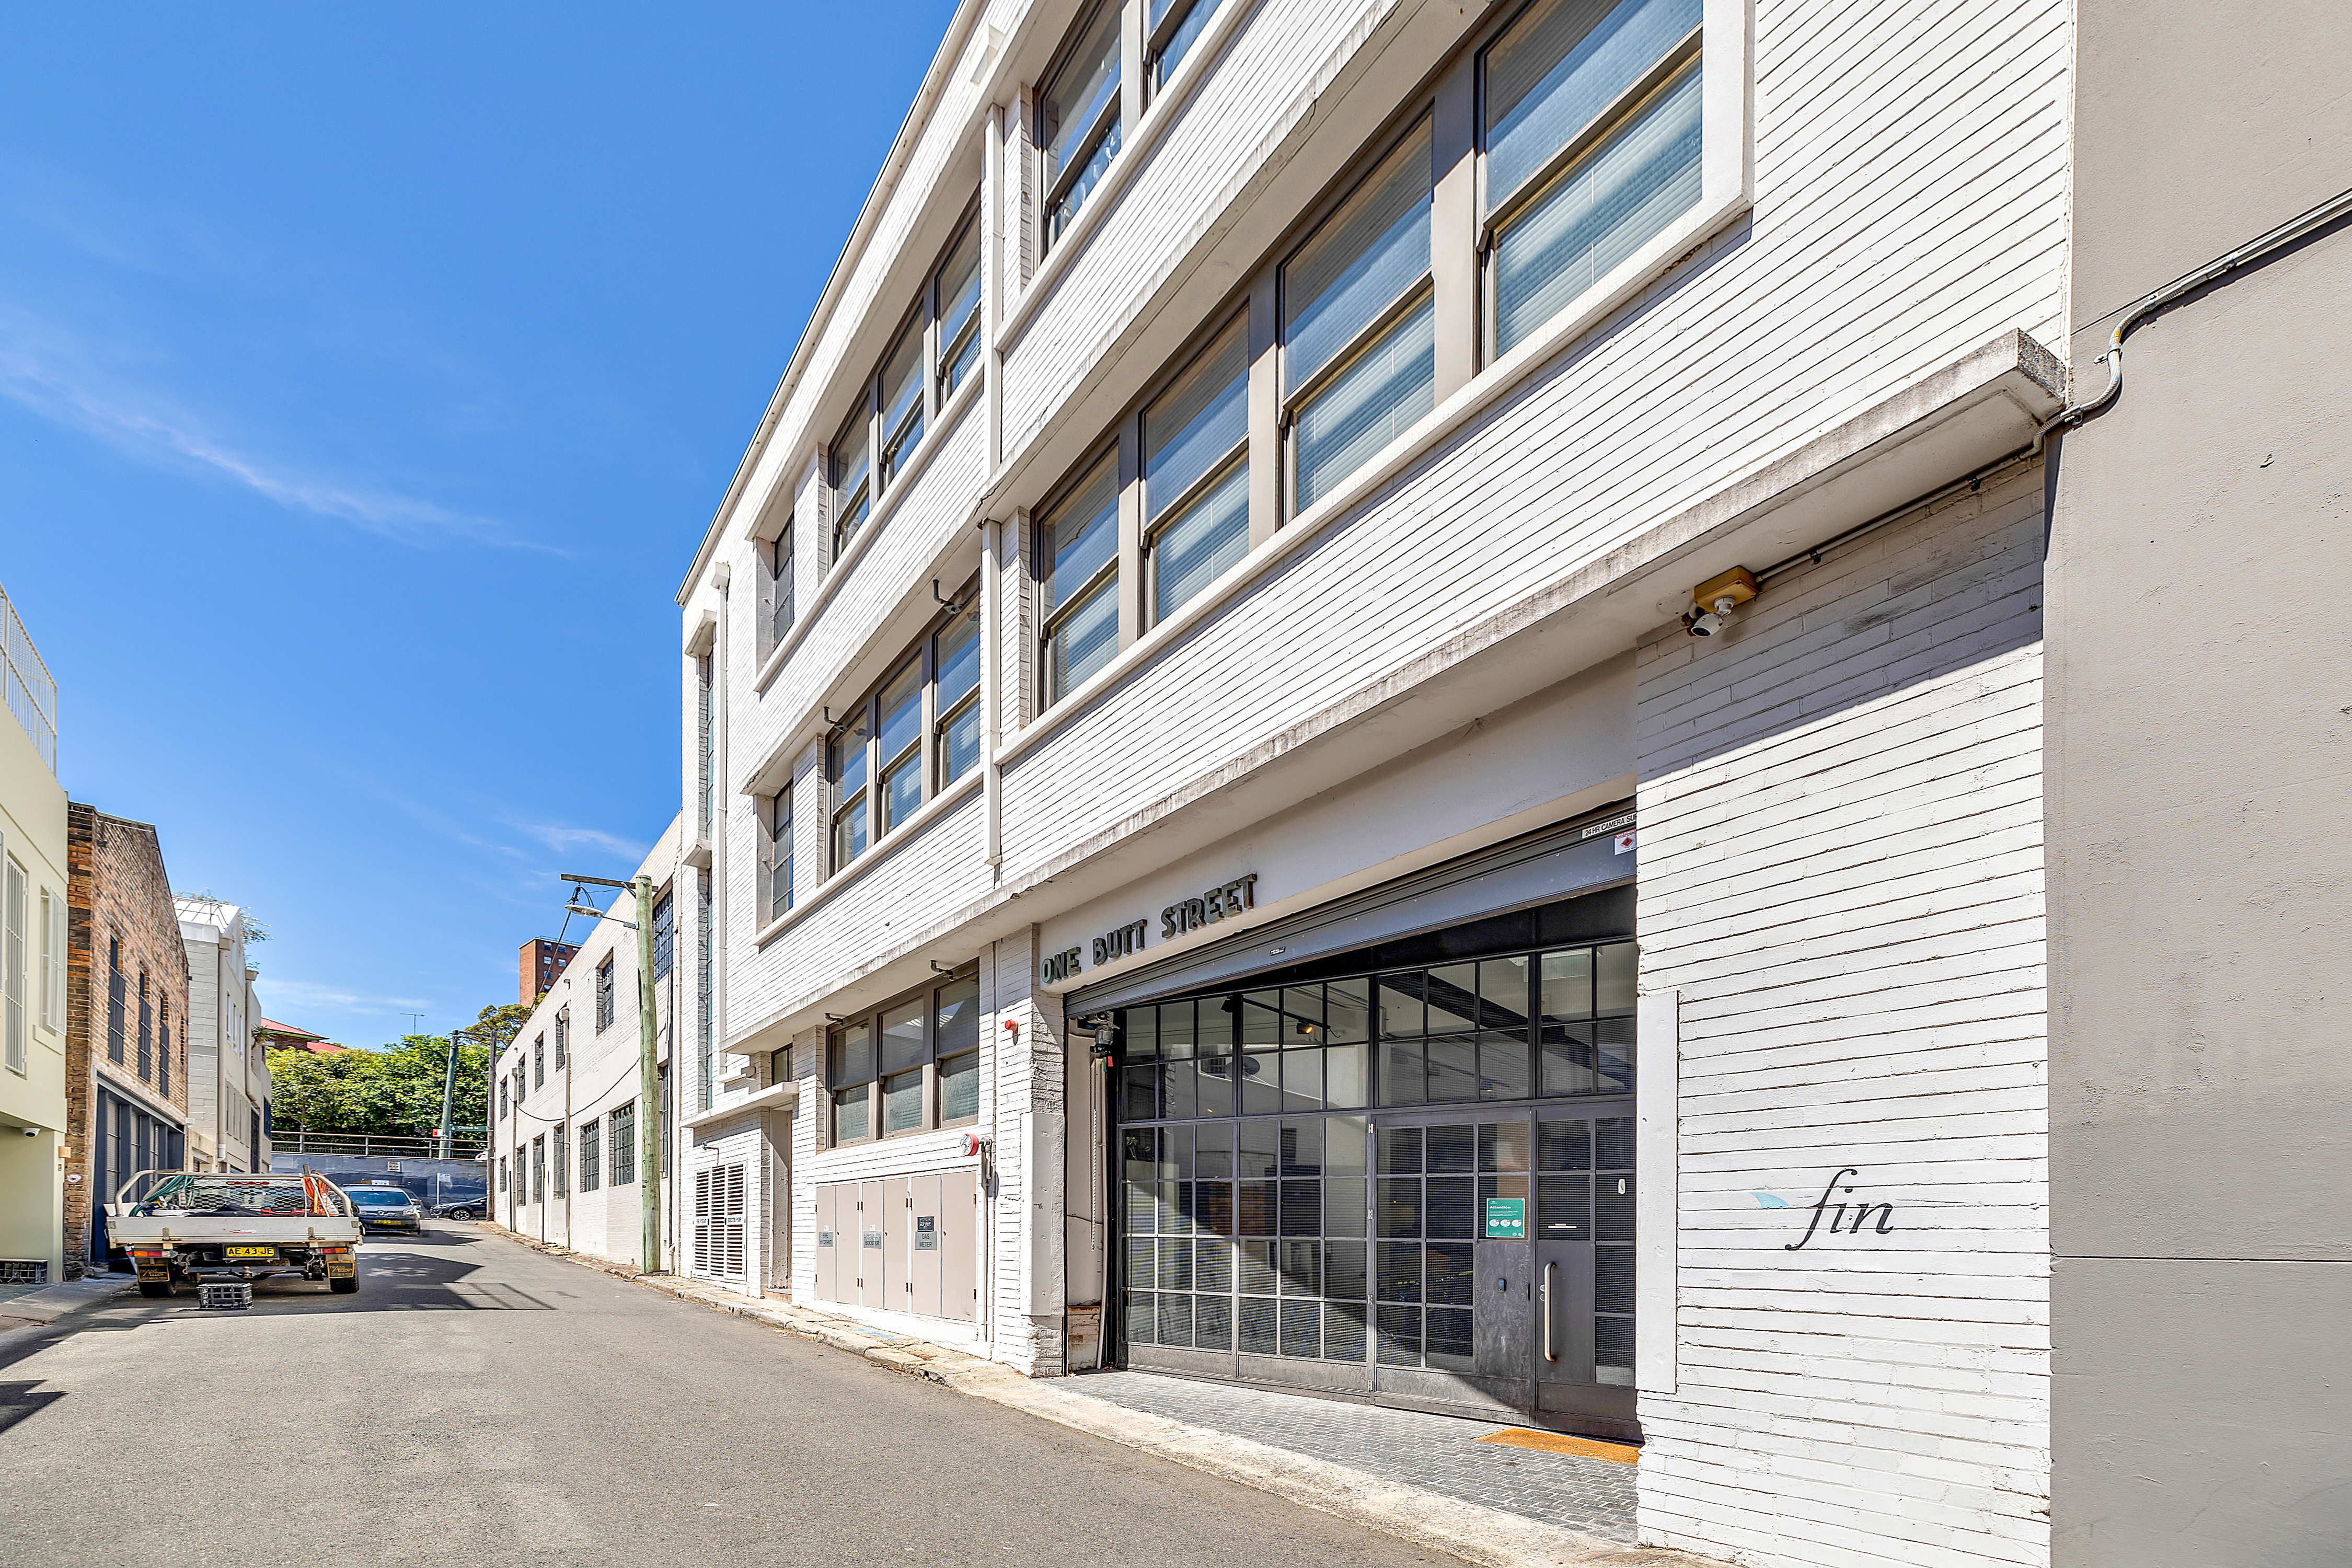 Surry Hills office sells for record breaking price at auction